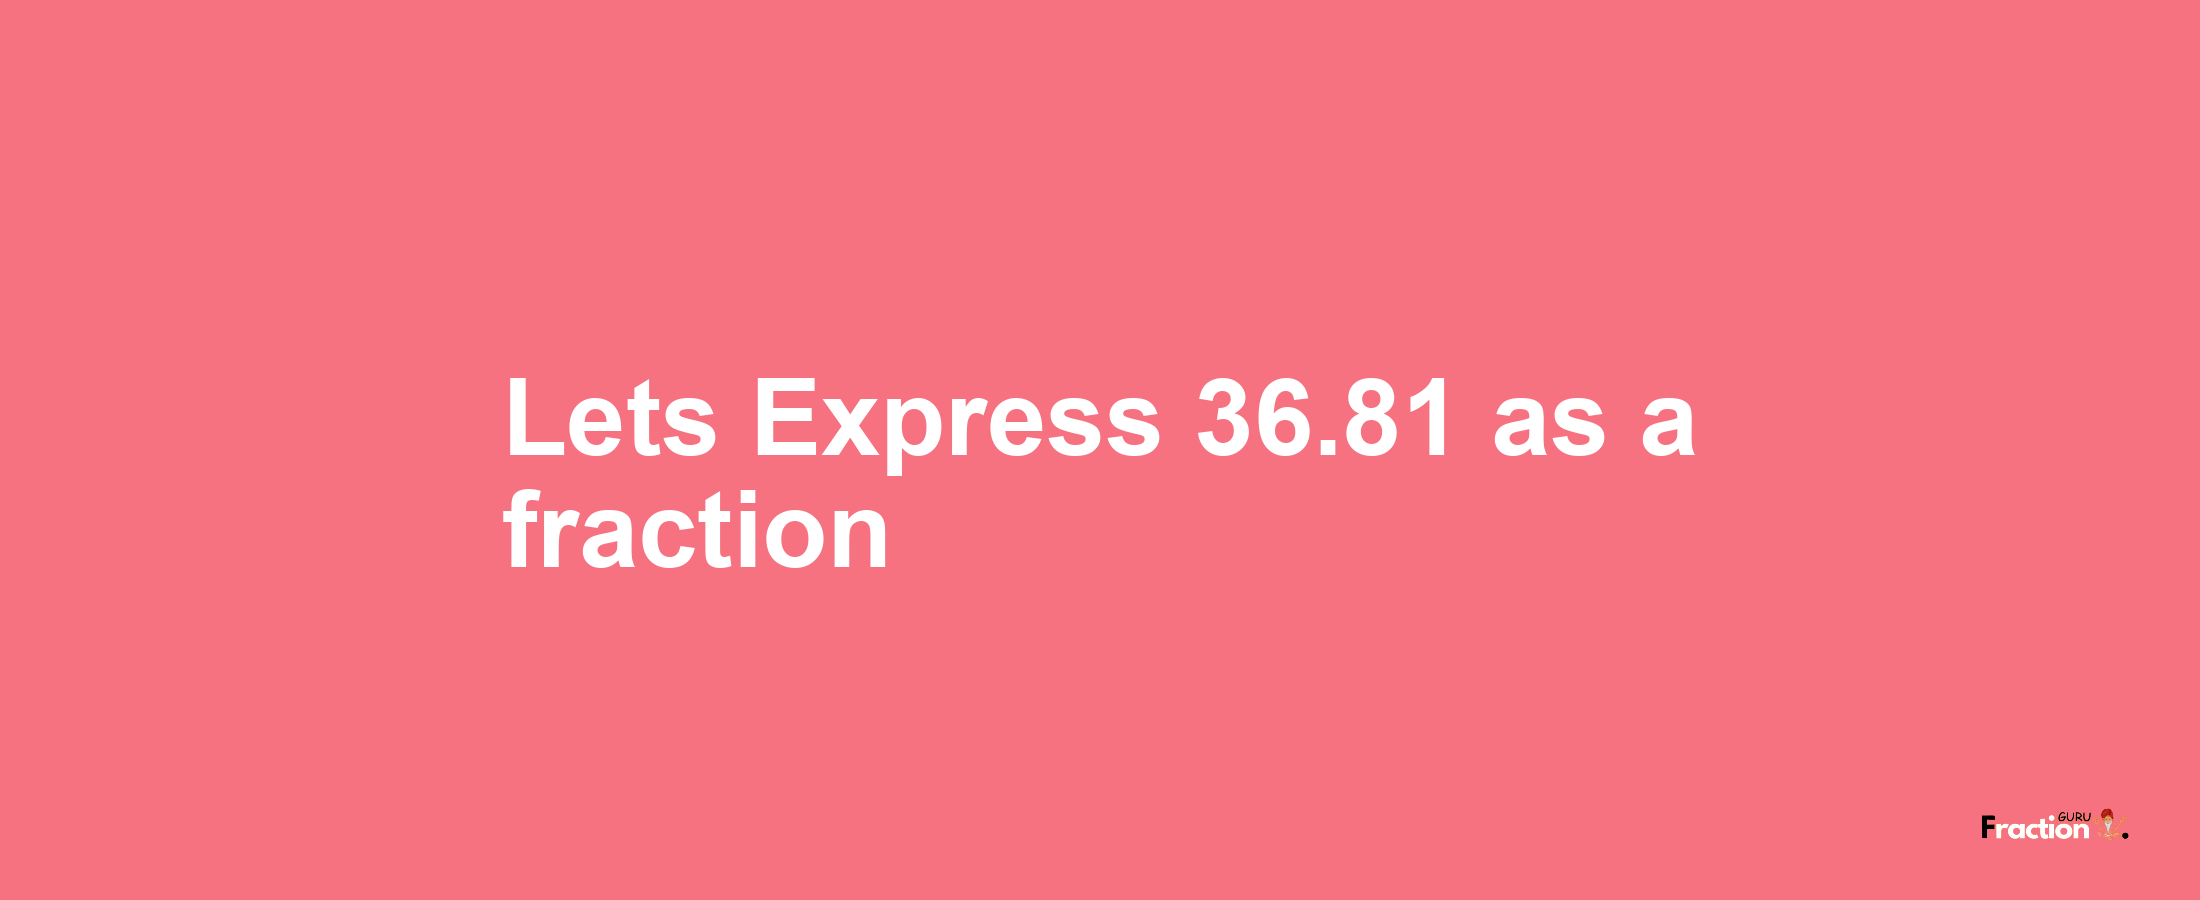 Lets Express 36.81 as afraction